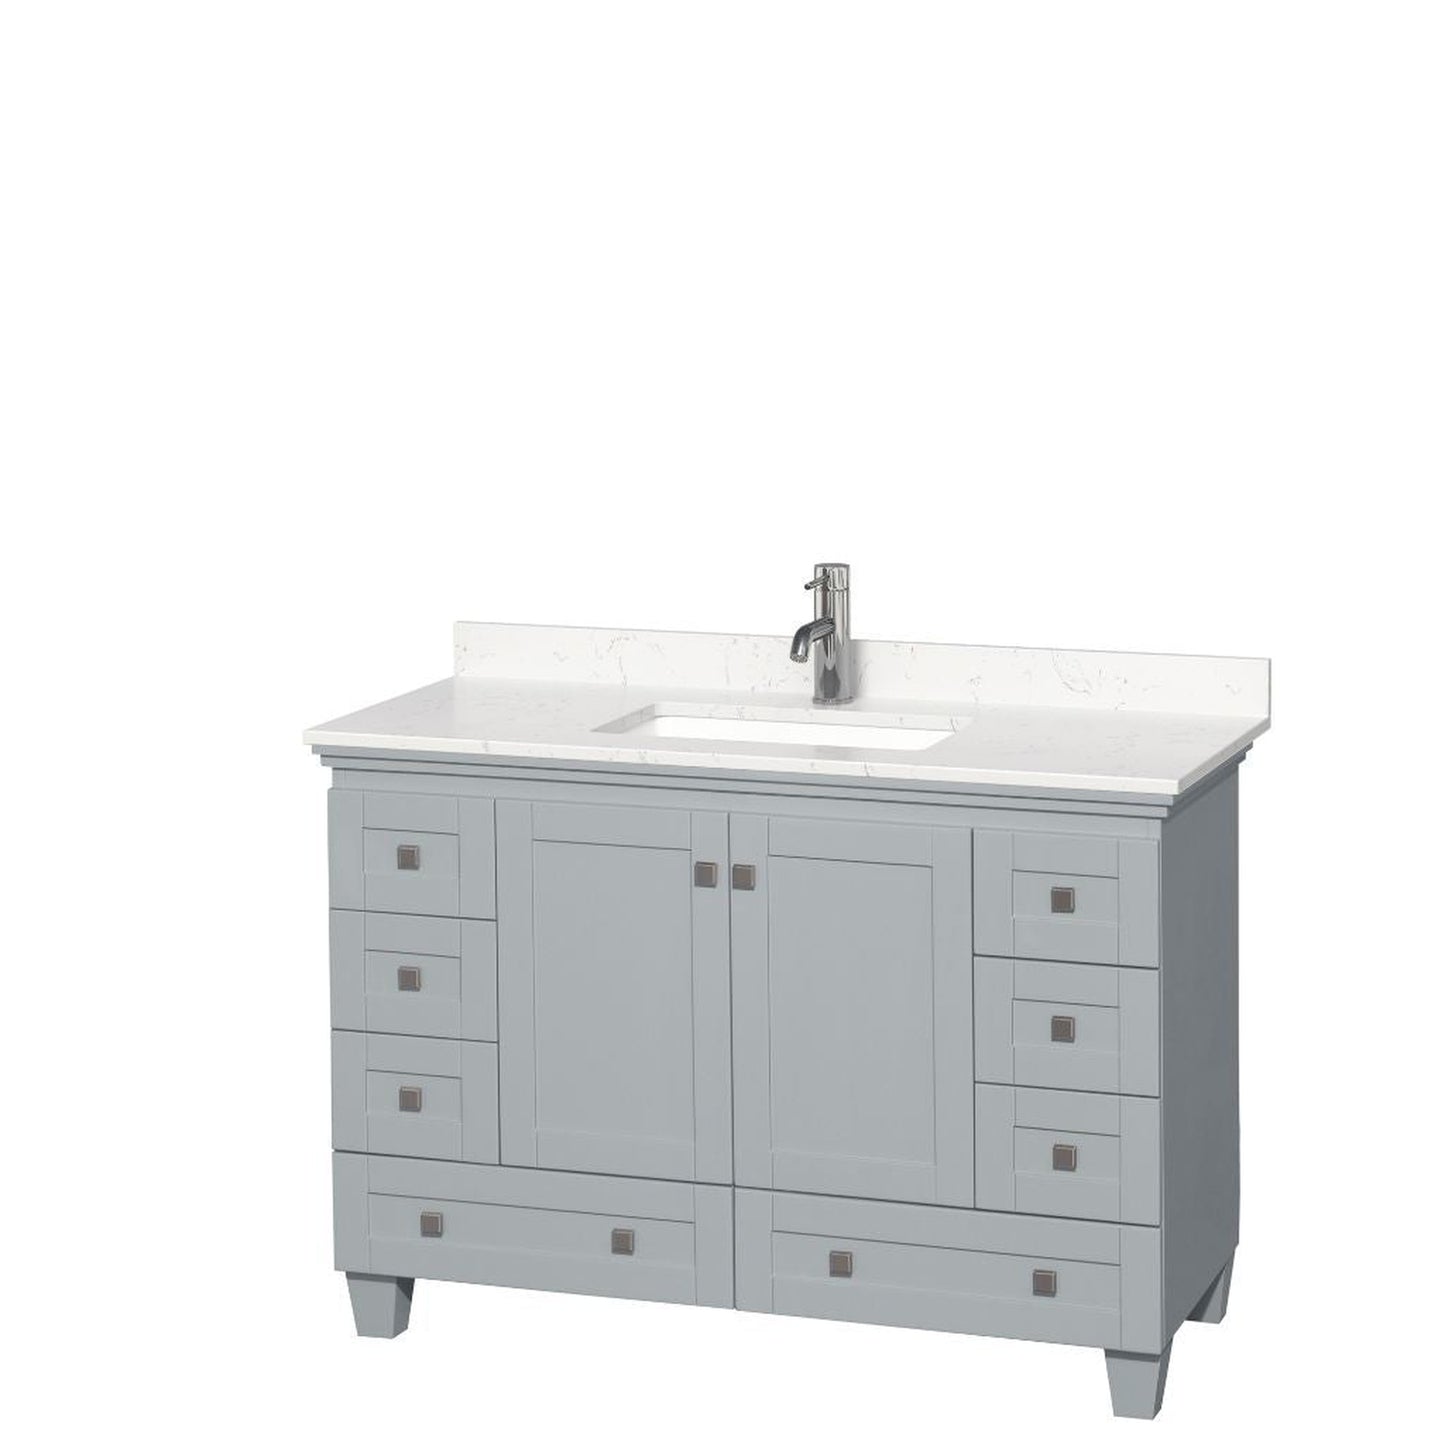 Wyndham Collection Acclaim 48" Single Bathroom Oyster Gray Vanity With Light-Vein Carrara Cultured Marble Countertop And Undermount Square Sink